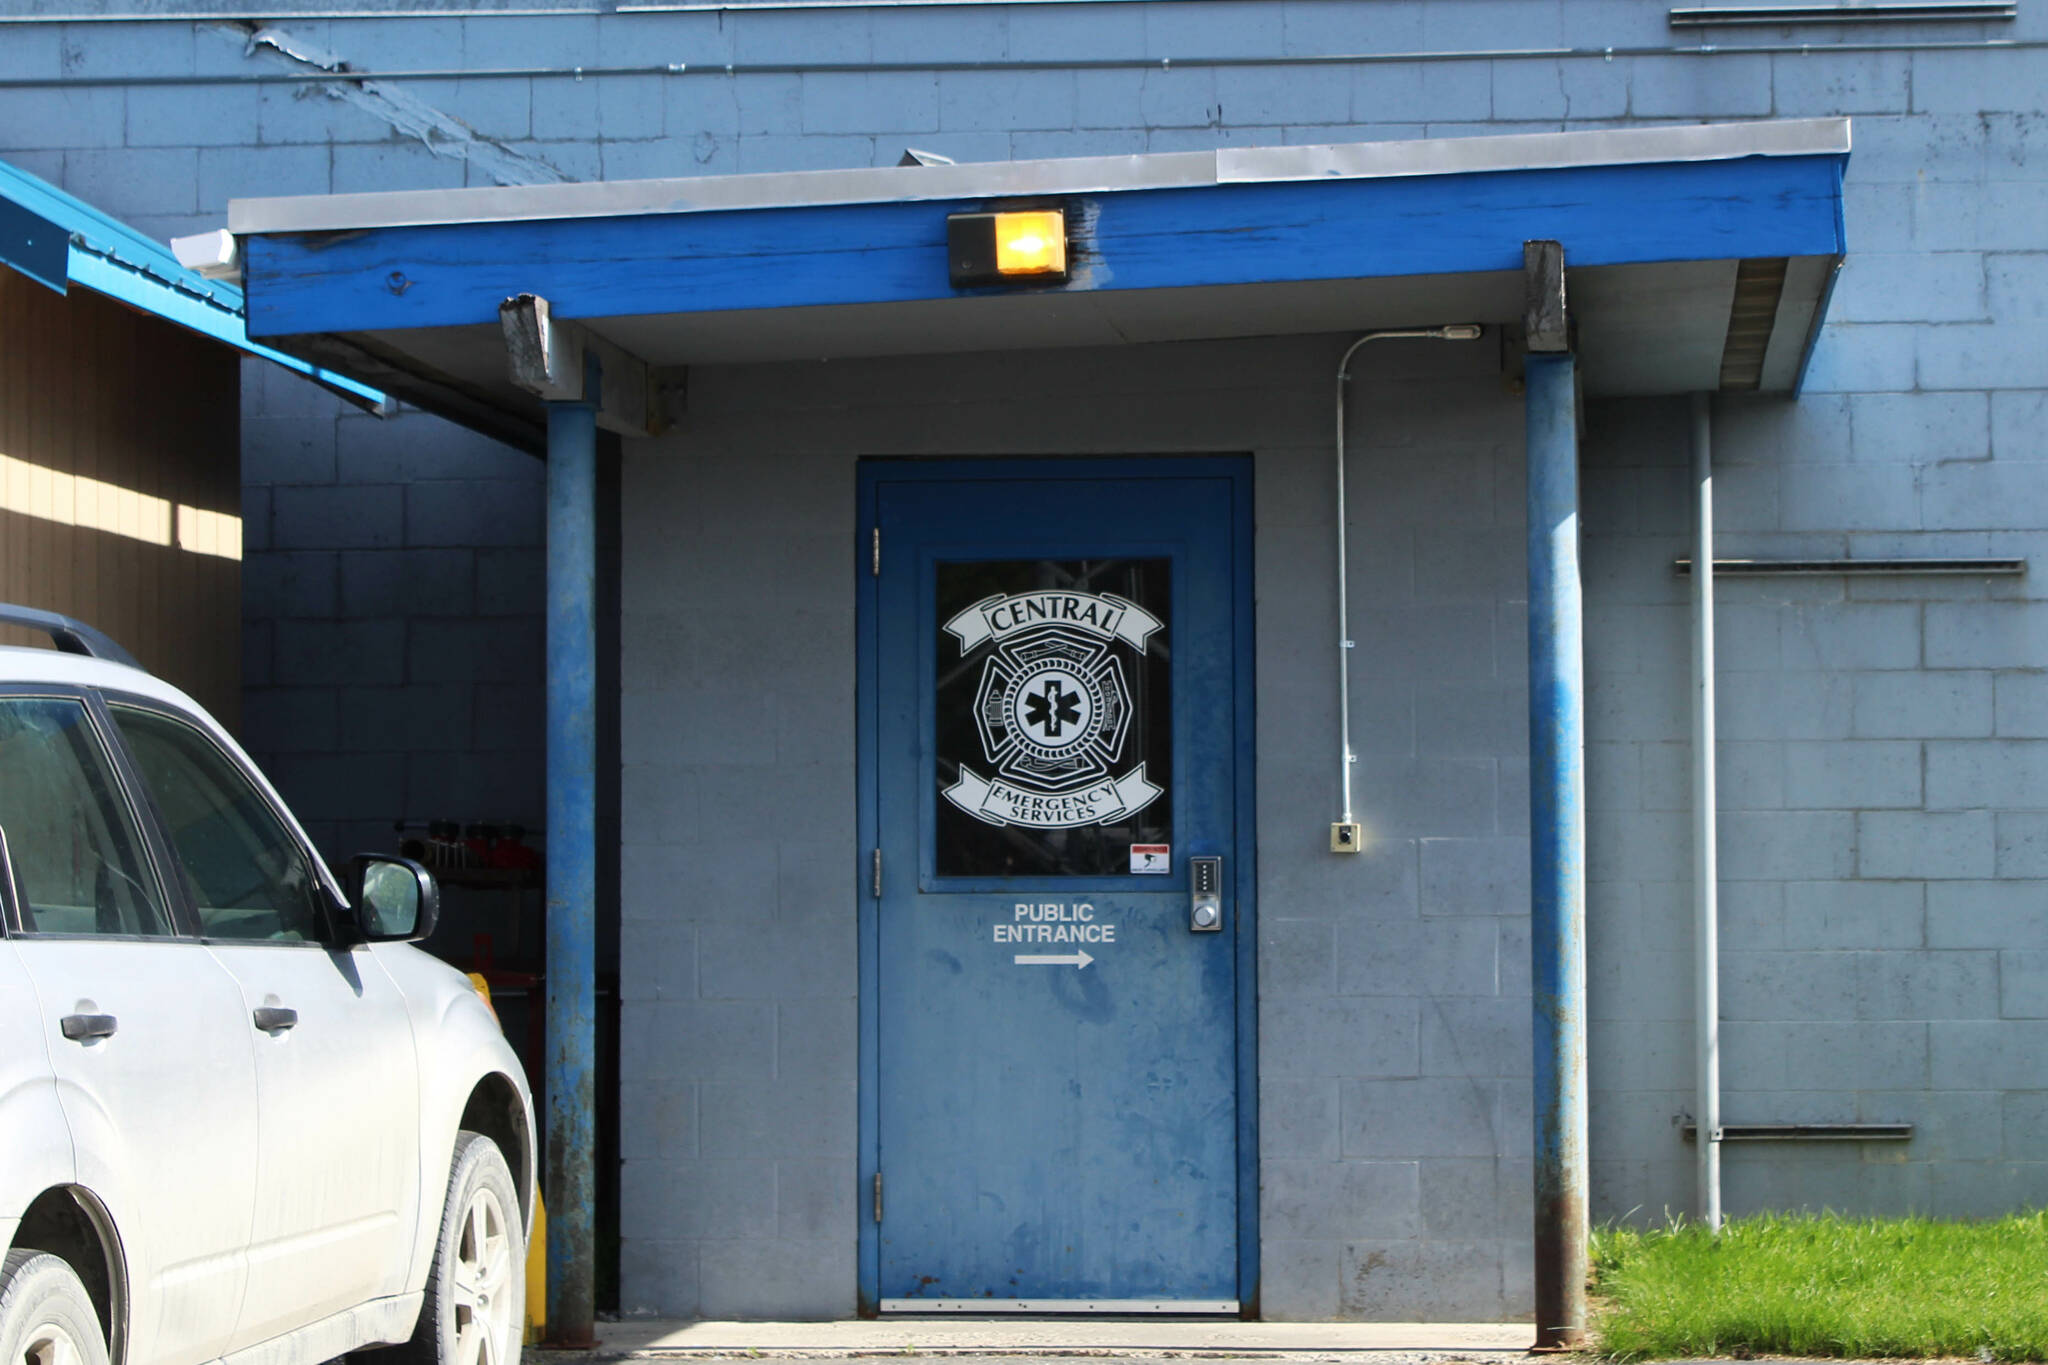 Signage denotes the entrance to Central Emergency Services at the agency’s original entrance on Tuesday, July 26, 2022, in Soldotna, Alaska. (Ashlyn O’Hara/Peninsula Clarion)